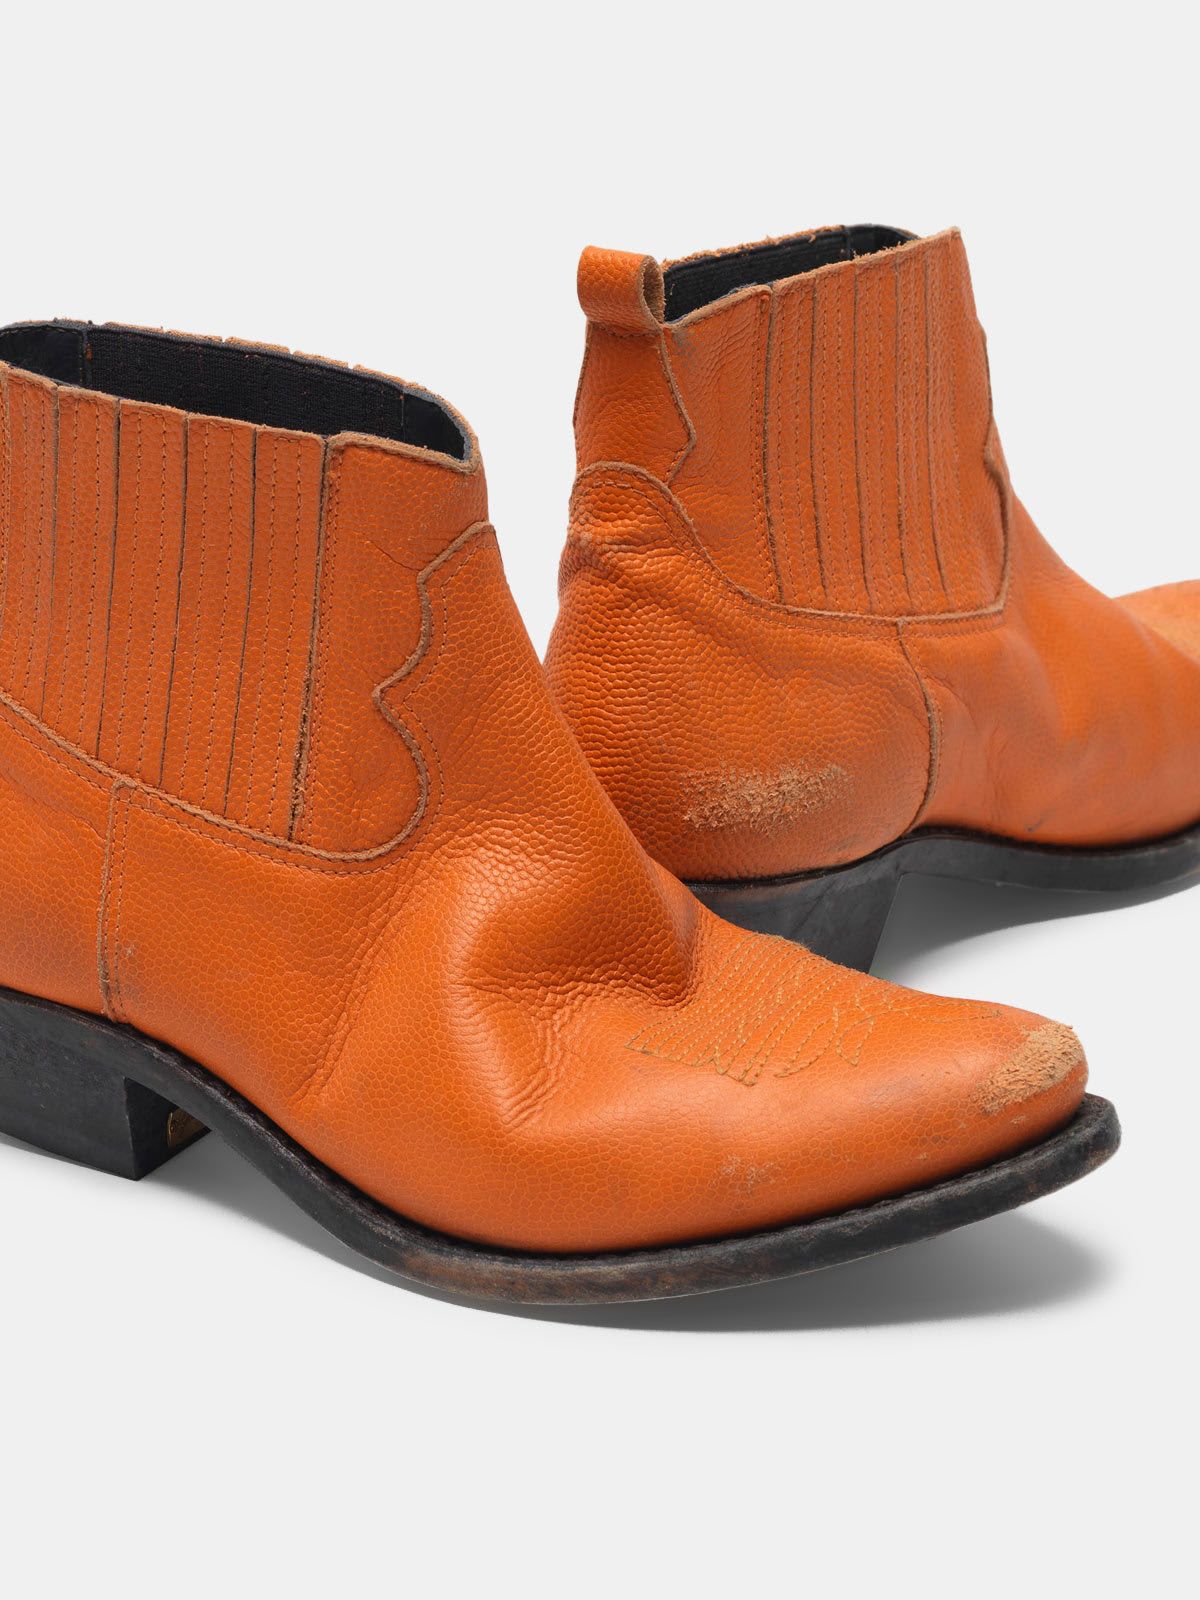 Crosby ankle boots in vintage-effect basketball leather